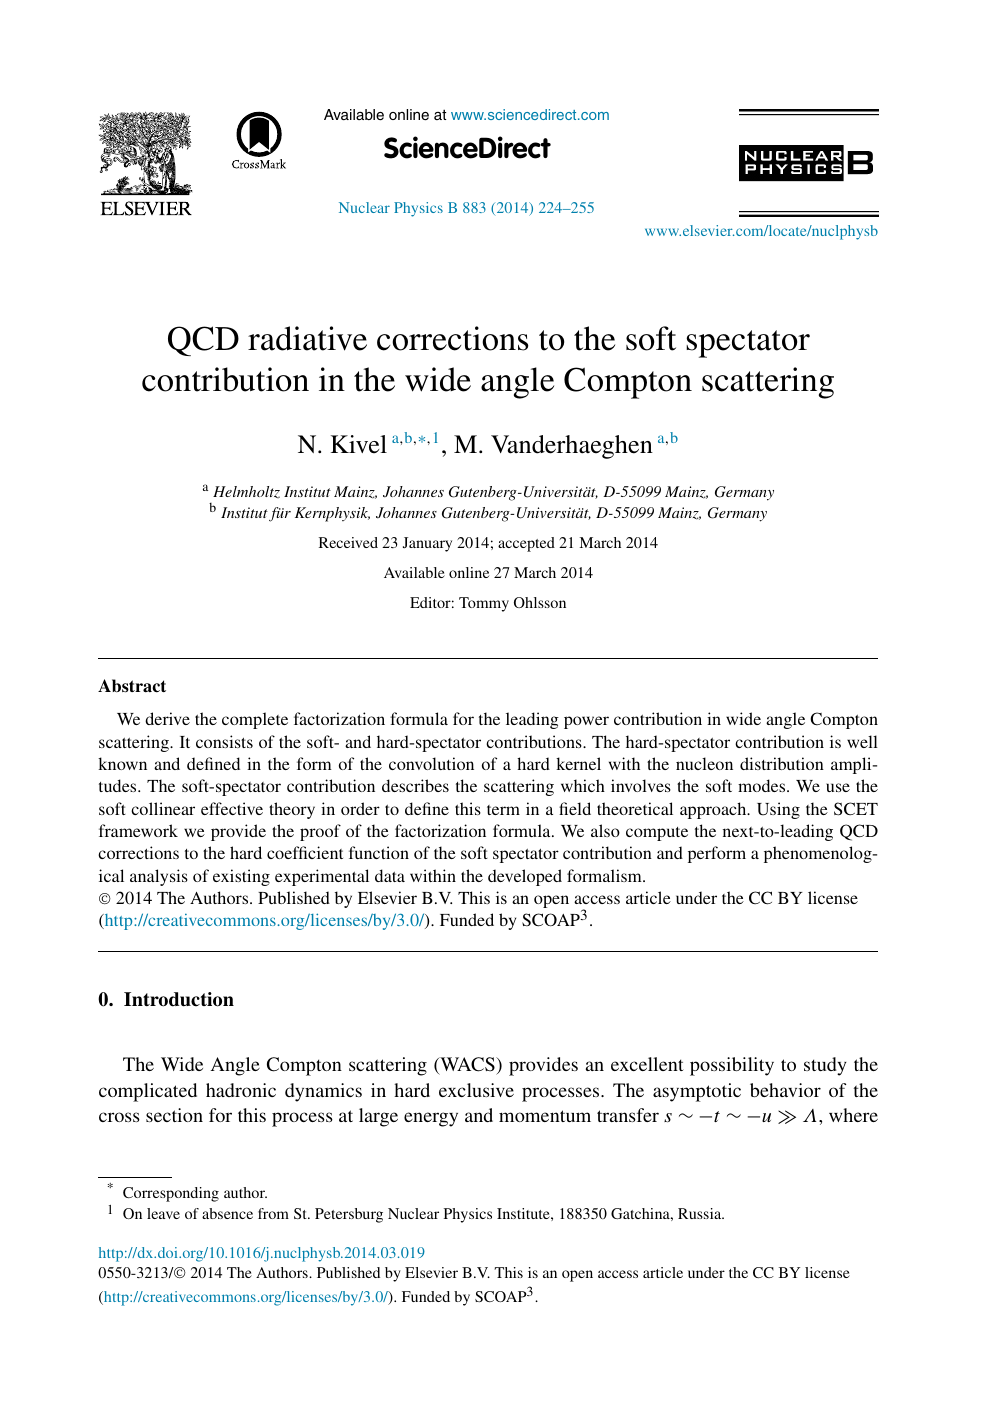 Qcd Radiative Corrections To The Soft Spectator Contribution In The Wide Angle Compton Scattering Topic Of Research Paper In Physical Sciences Download Scholarly Article Pdf And Read For Free On Cyberleninka